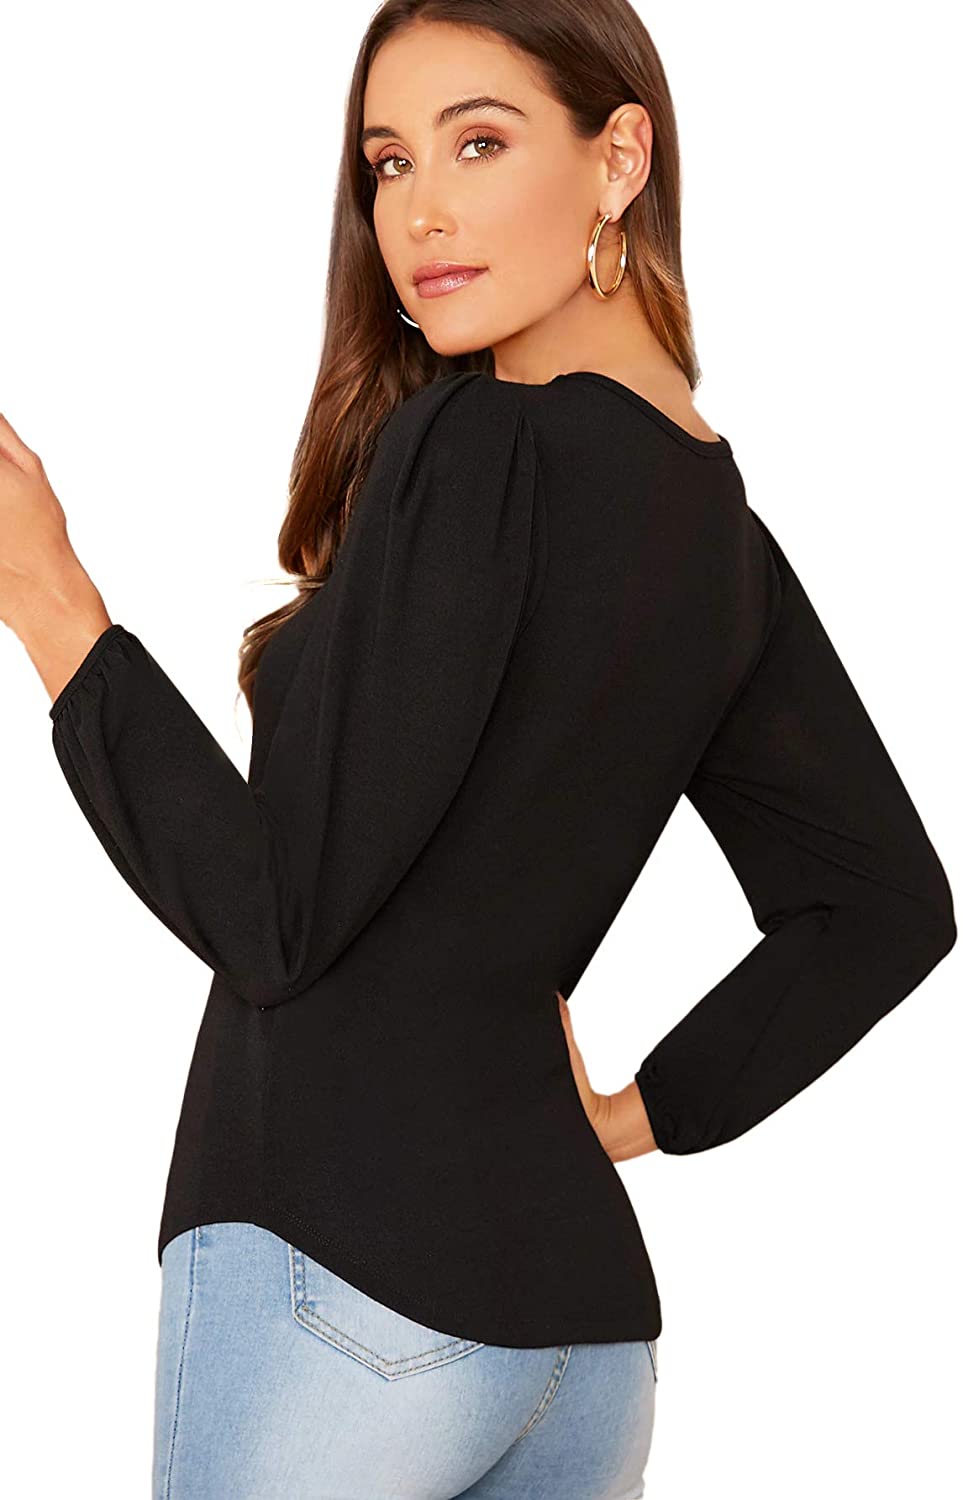 SheIn Women's Casual Round Neck Blouse Top Puff Sleeve ...